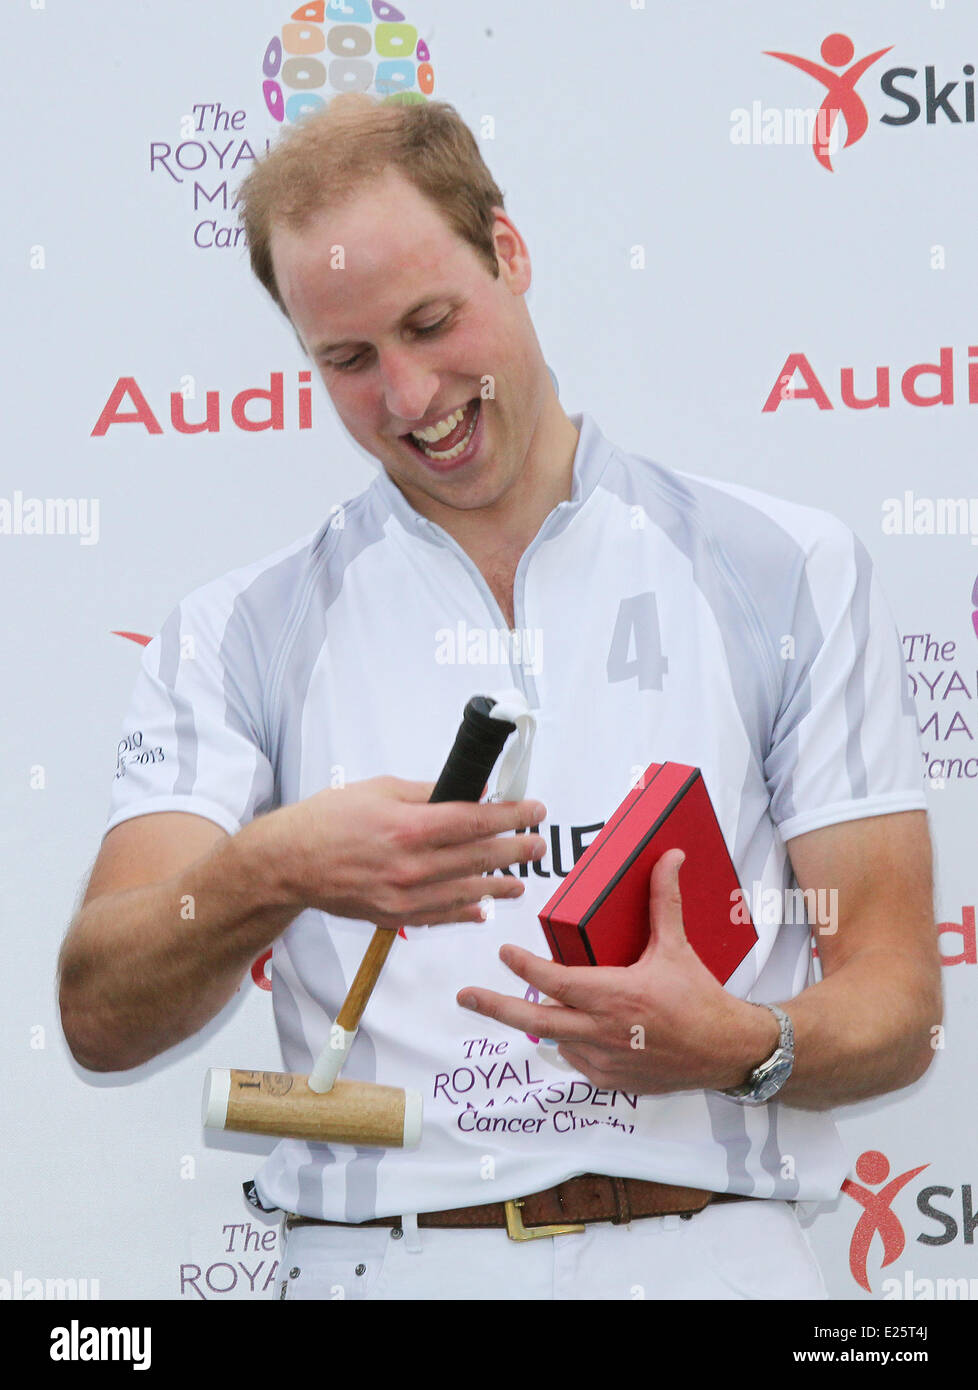 Britain's Prince WIlliam and Prince Harry play a charity polo match at the Audi Polo Challenge, Coworth Park, Berkshire, The match is in aid of the charities SkillForce and The Royal Marsden Cancer Charity, of which The Duke of Cambridge is Patron and President respectively.  Featuring: Prince WIlliam,Prince Harry Where: Windsor, Royaume Uni When: 03 Aug 2013 Stock Photo